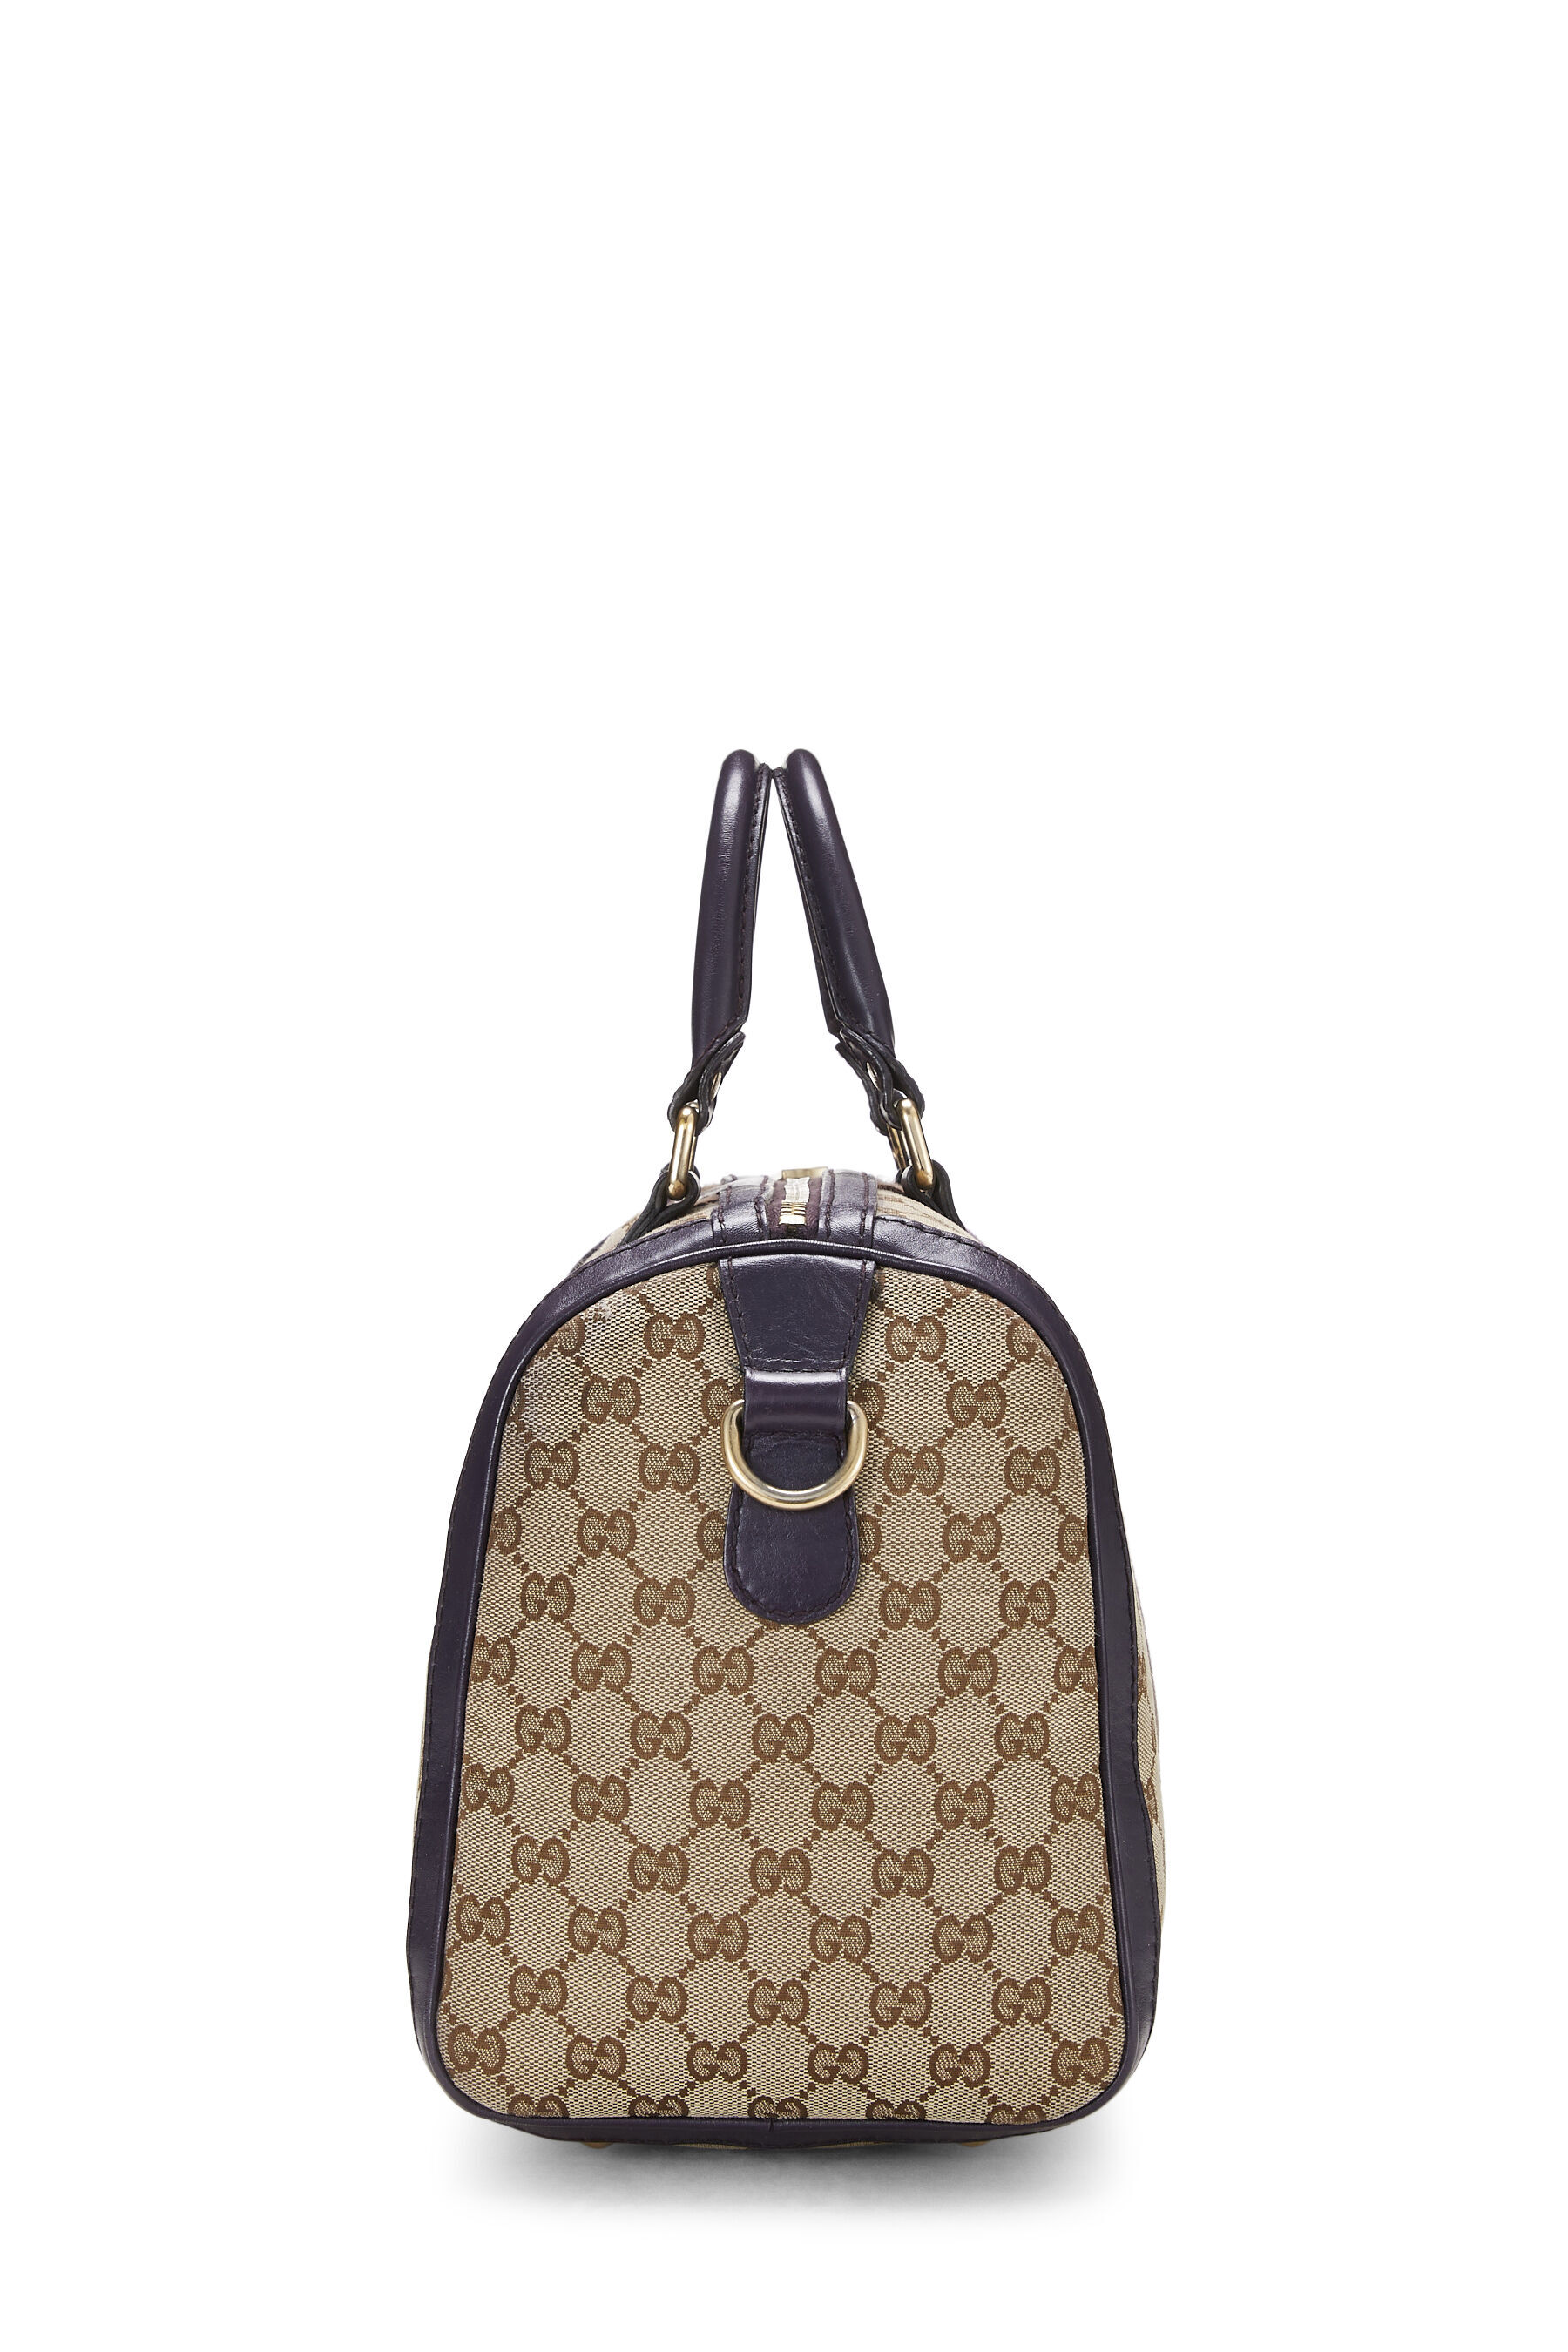 Singal Color Gucci GUCCI OPHIDIA ORIGINAL SERIES BAG, Size: 25-28 cm Medium  at Rs 2999/piece in Noida